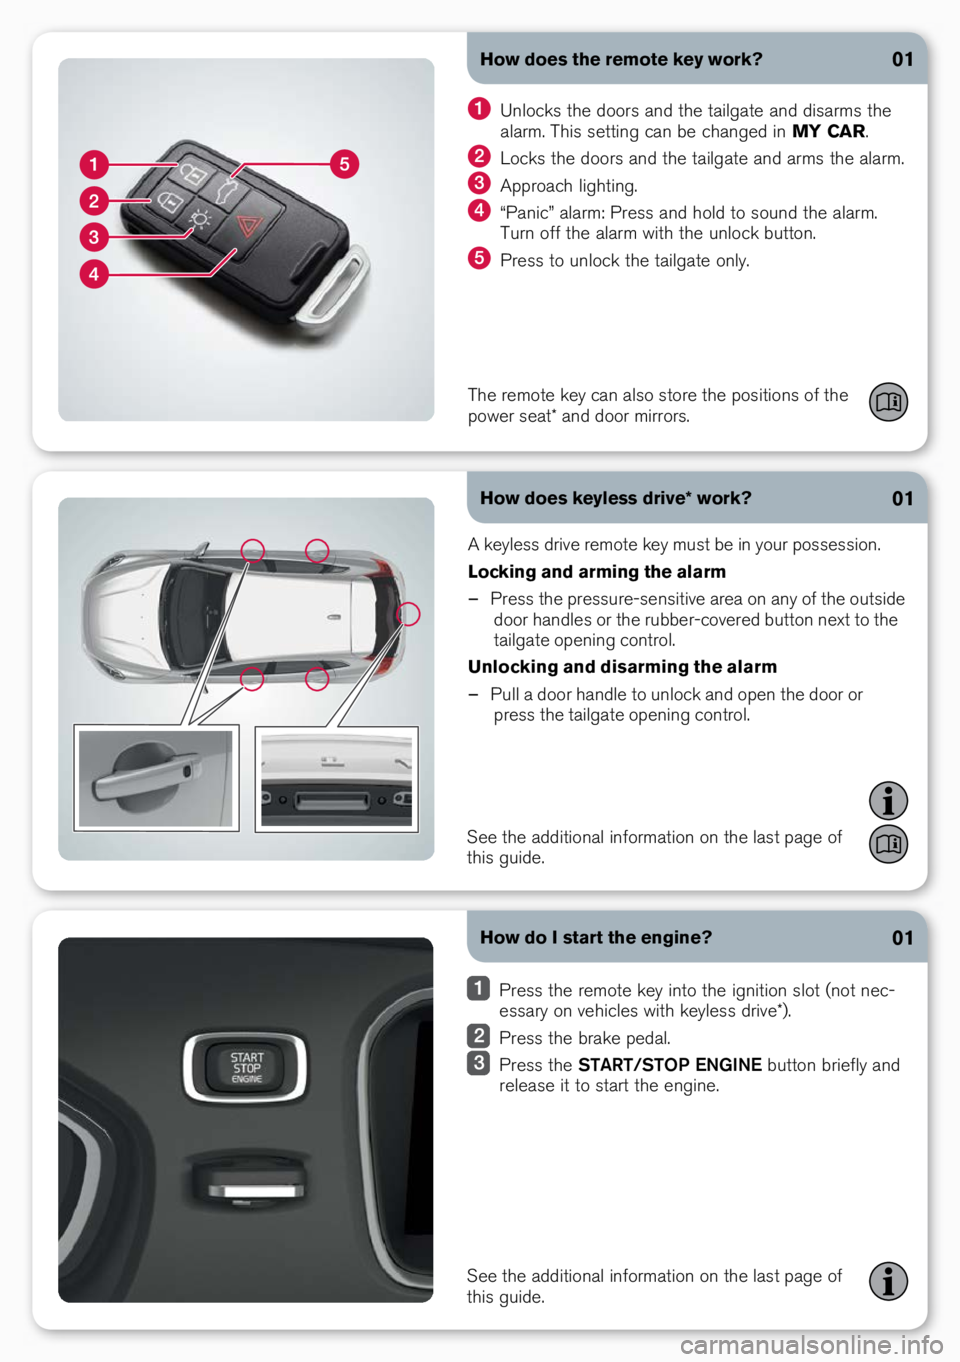 VOLVO XC60 2017  Quick Guide How does the remote key work?
How does keyless drive* work?01
01
A keyless \frive remote key must be in your possession.
Locking and arming the alarm 
– Press the pressure-sensitive area on any of t